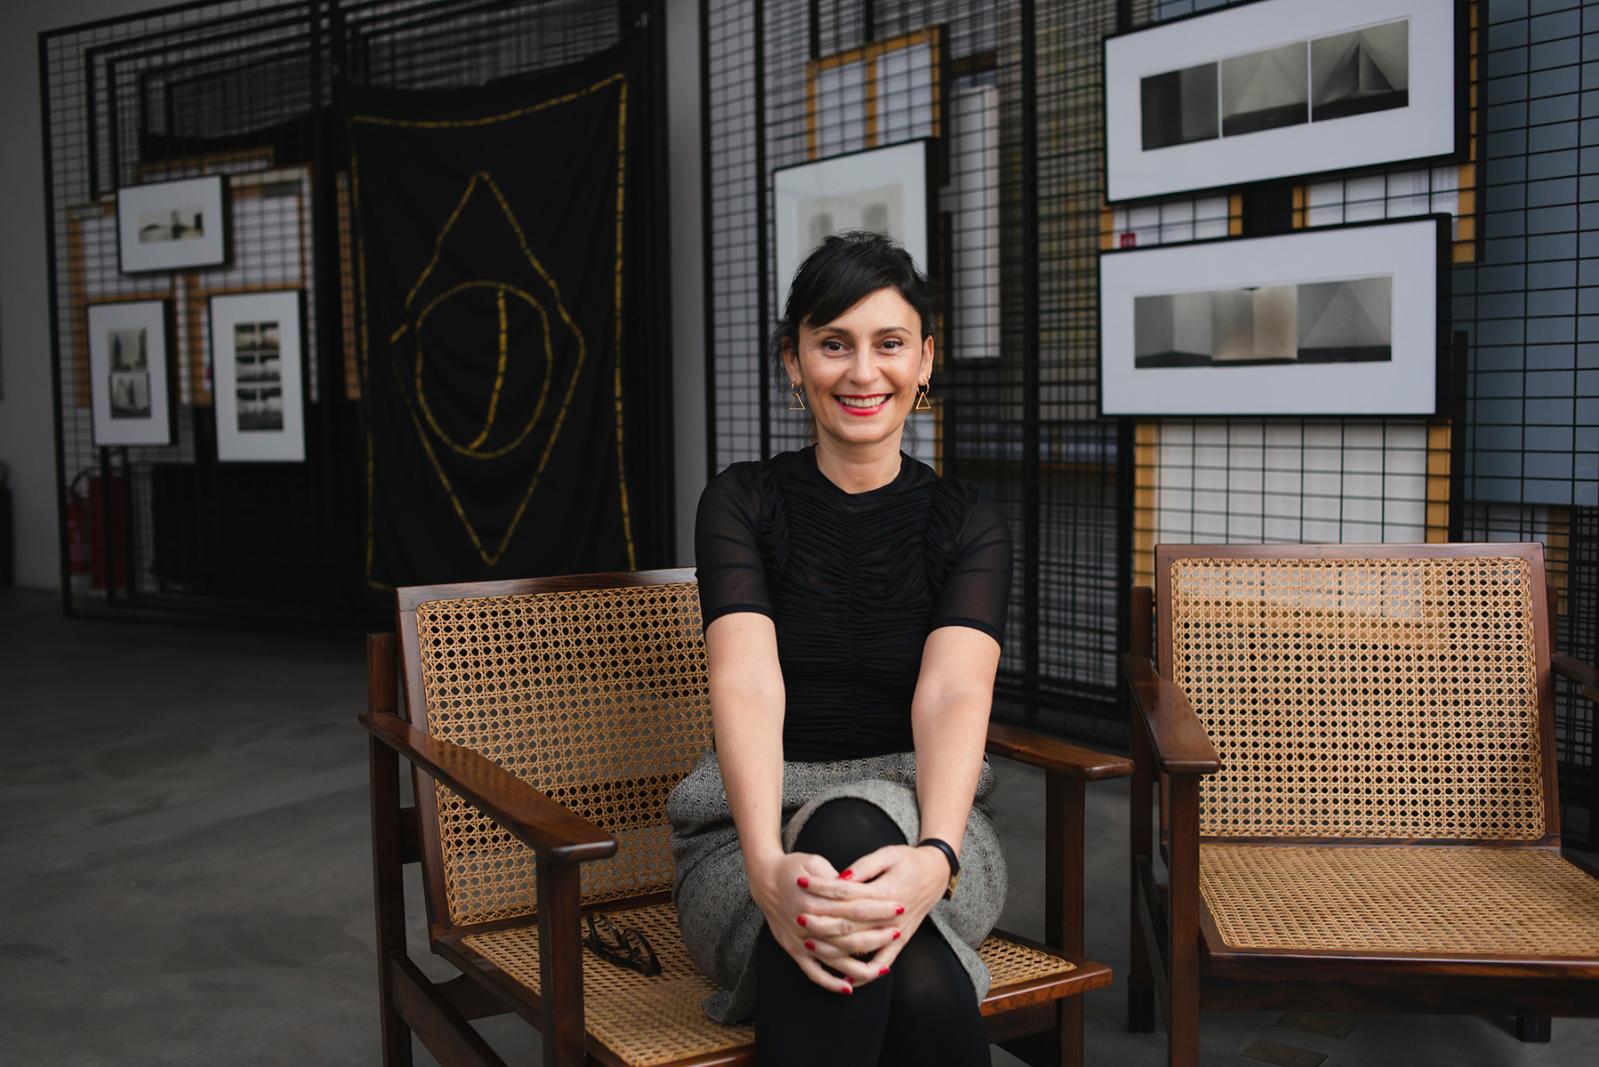 Gallery Owner Jacqueline Martins Wants to Showcase Brazilian Artwork